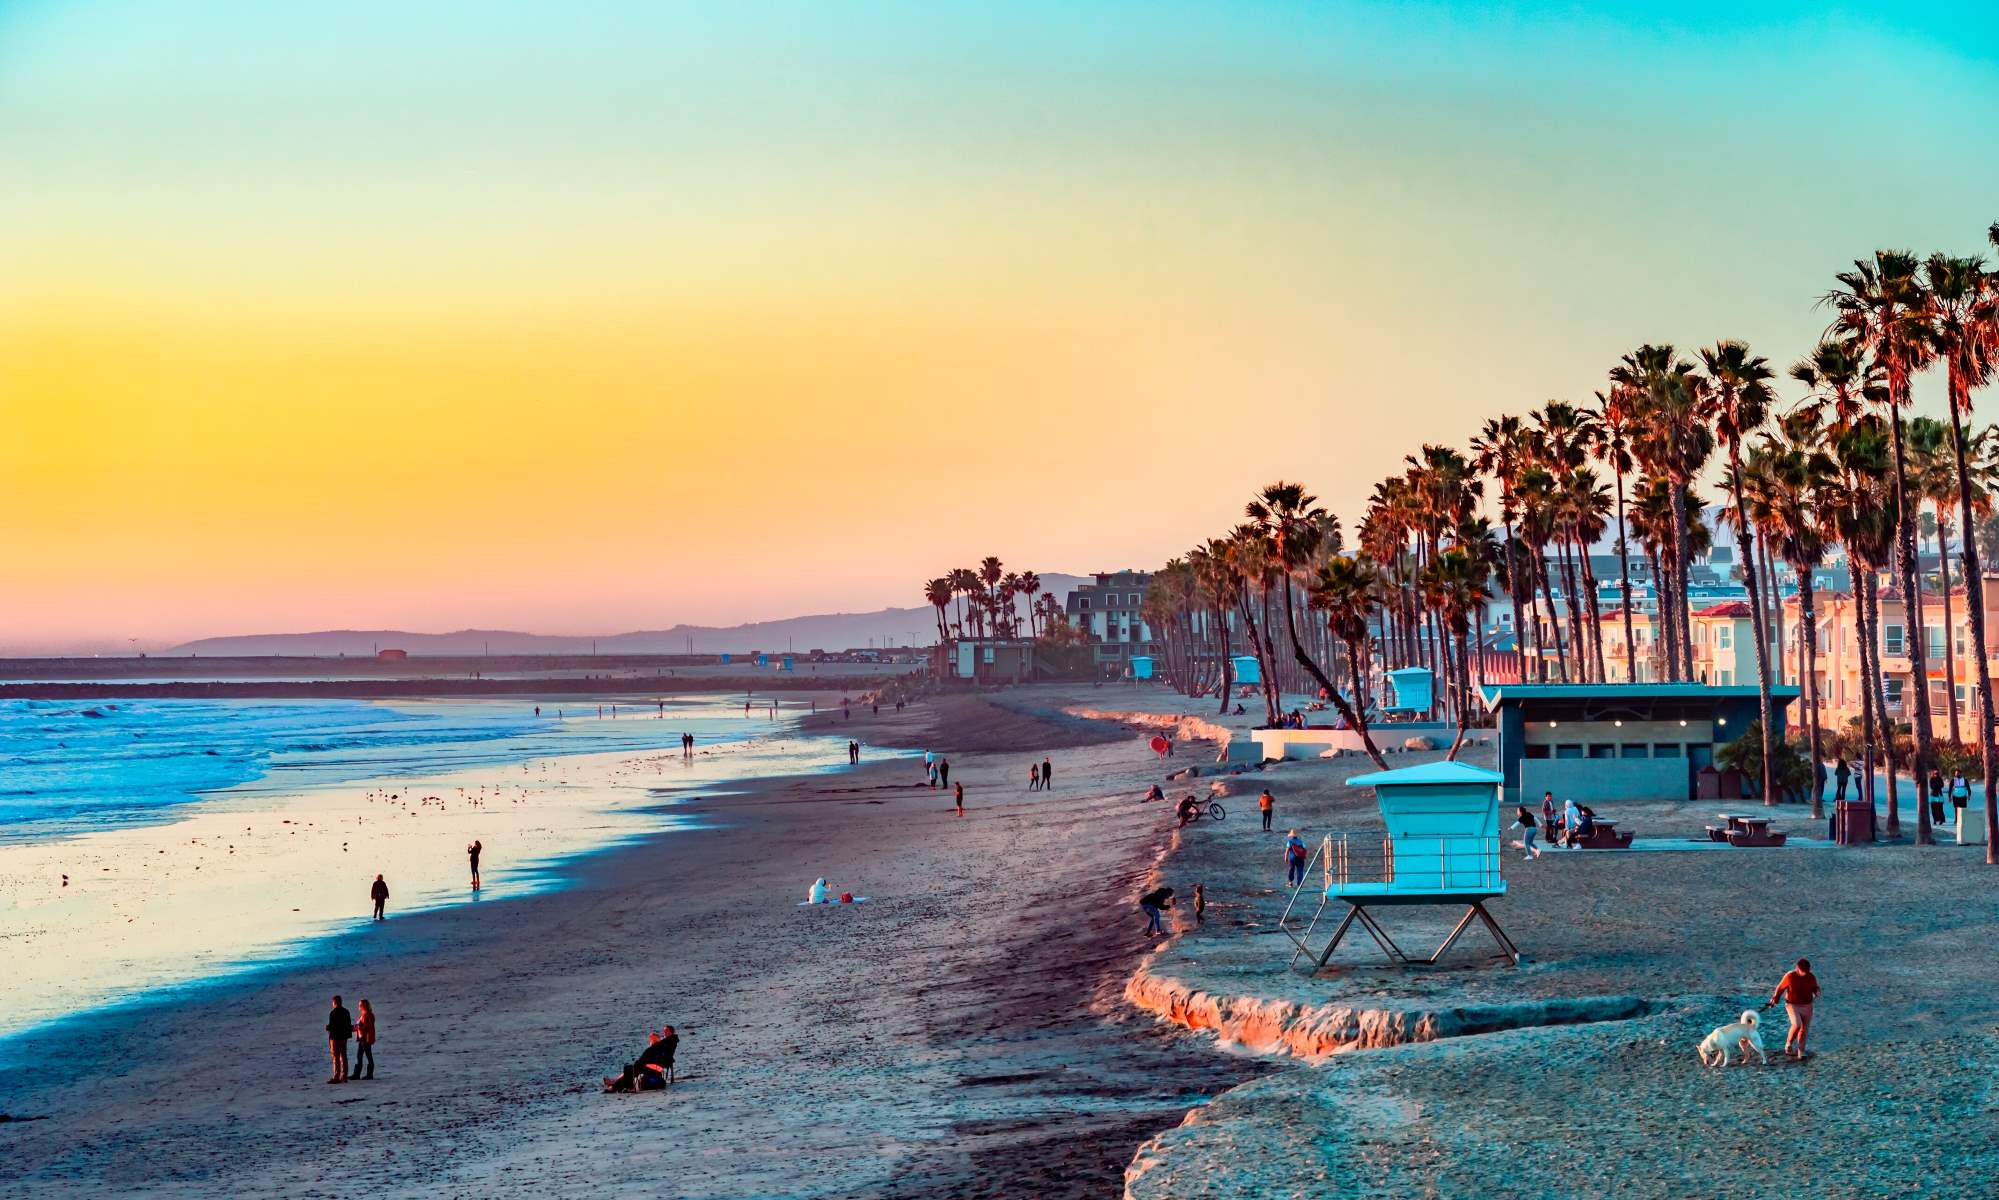 Uncover The Best Free And Unique Activities In Oceanside, CA!